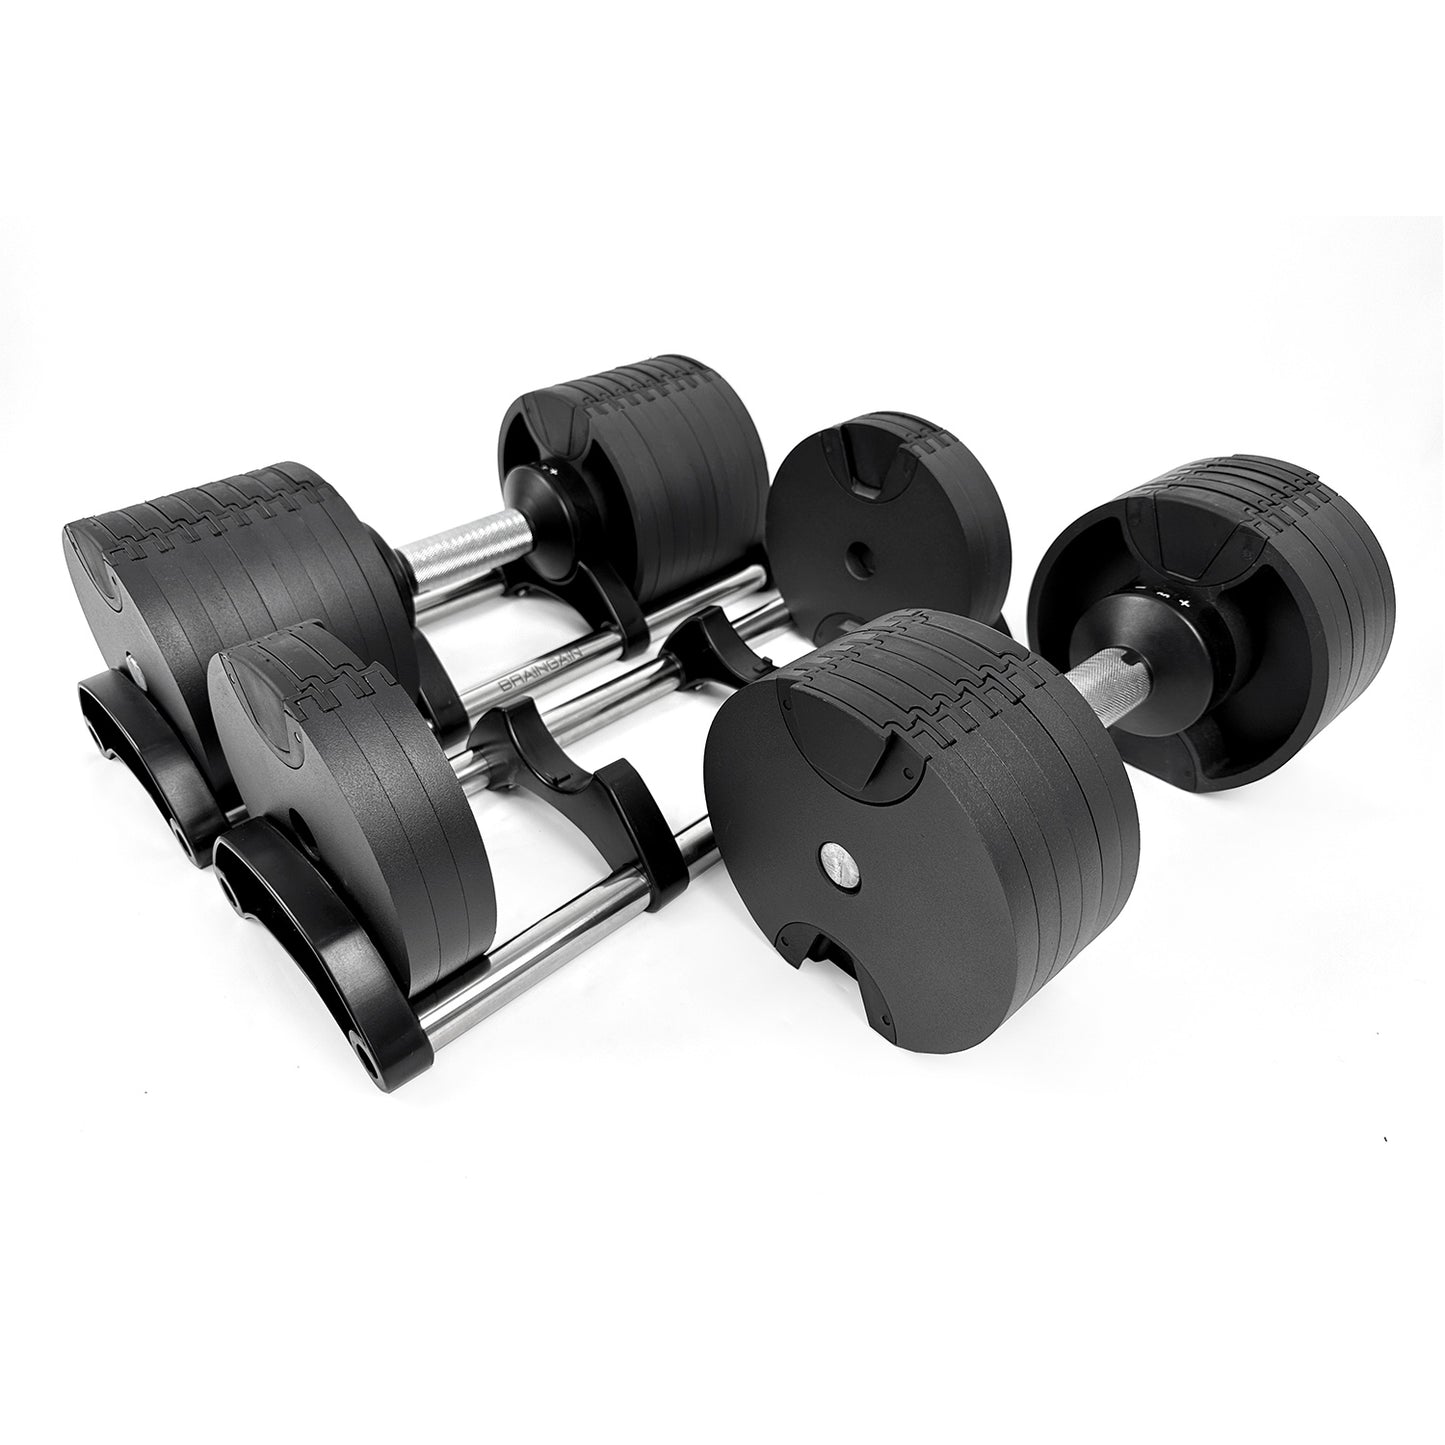 BRAINGAIN 45kg Round Adjustable Dumbbell Action Shot Showing Mechanism Two Units Side by Side